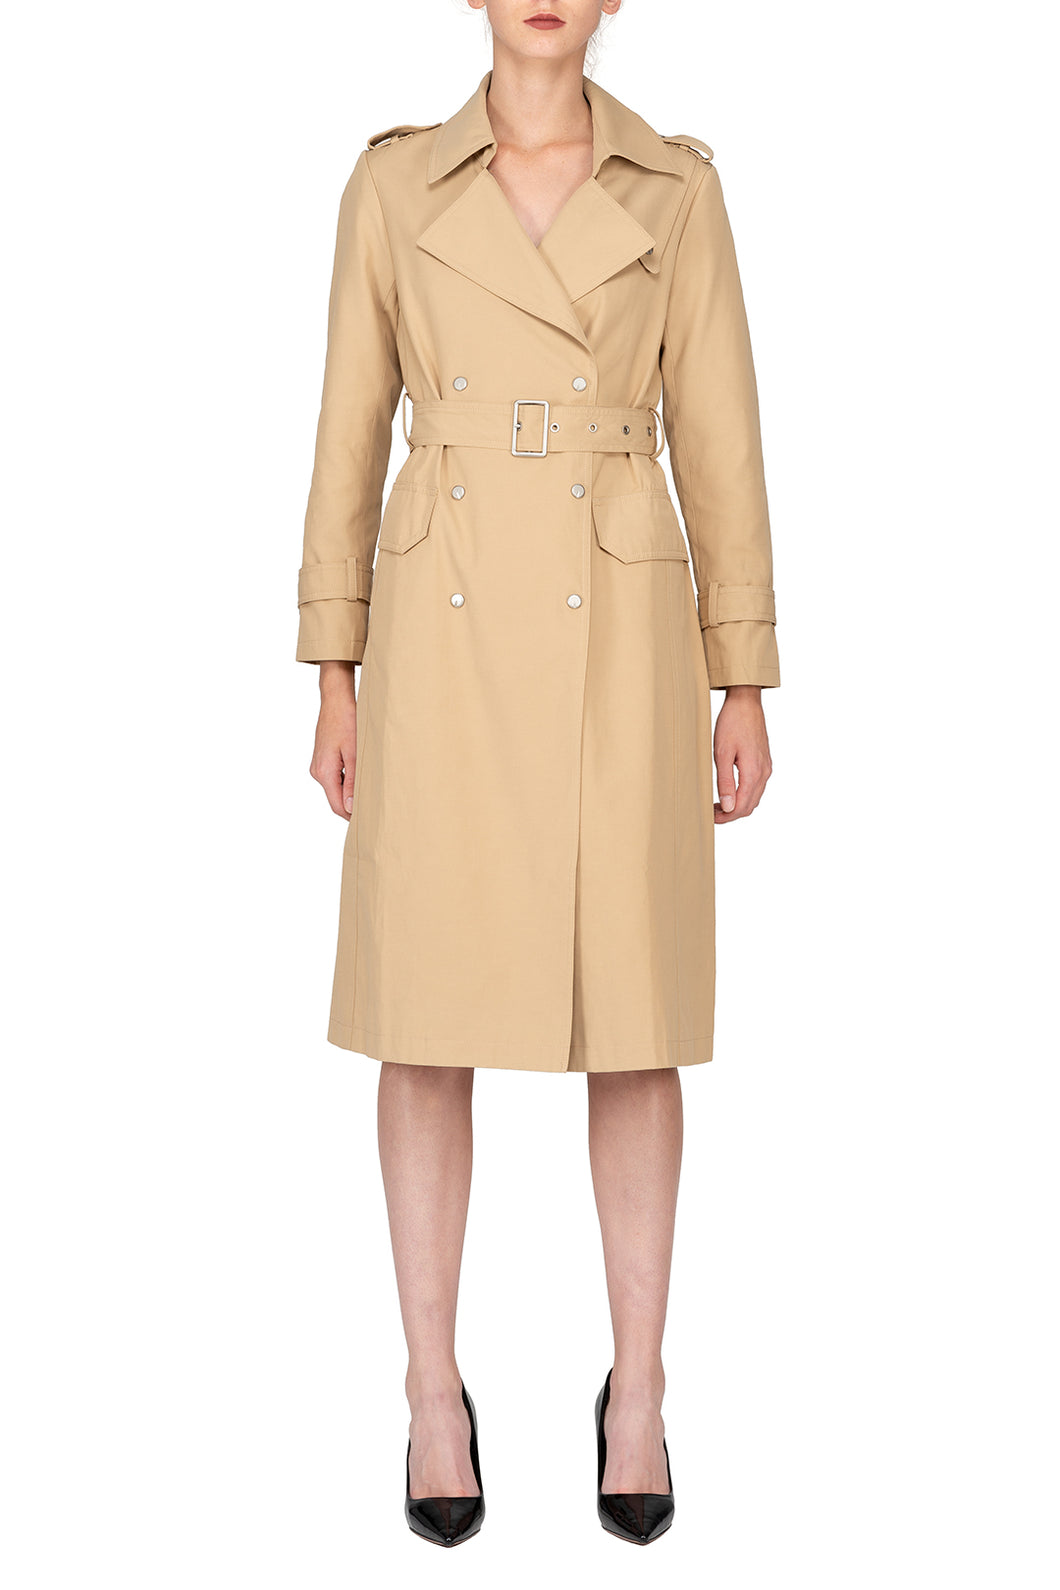 SCANDINAVIA-Double Breasted Belted Trench Coat